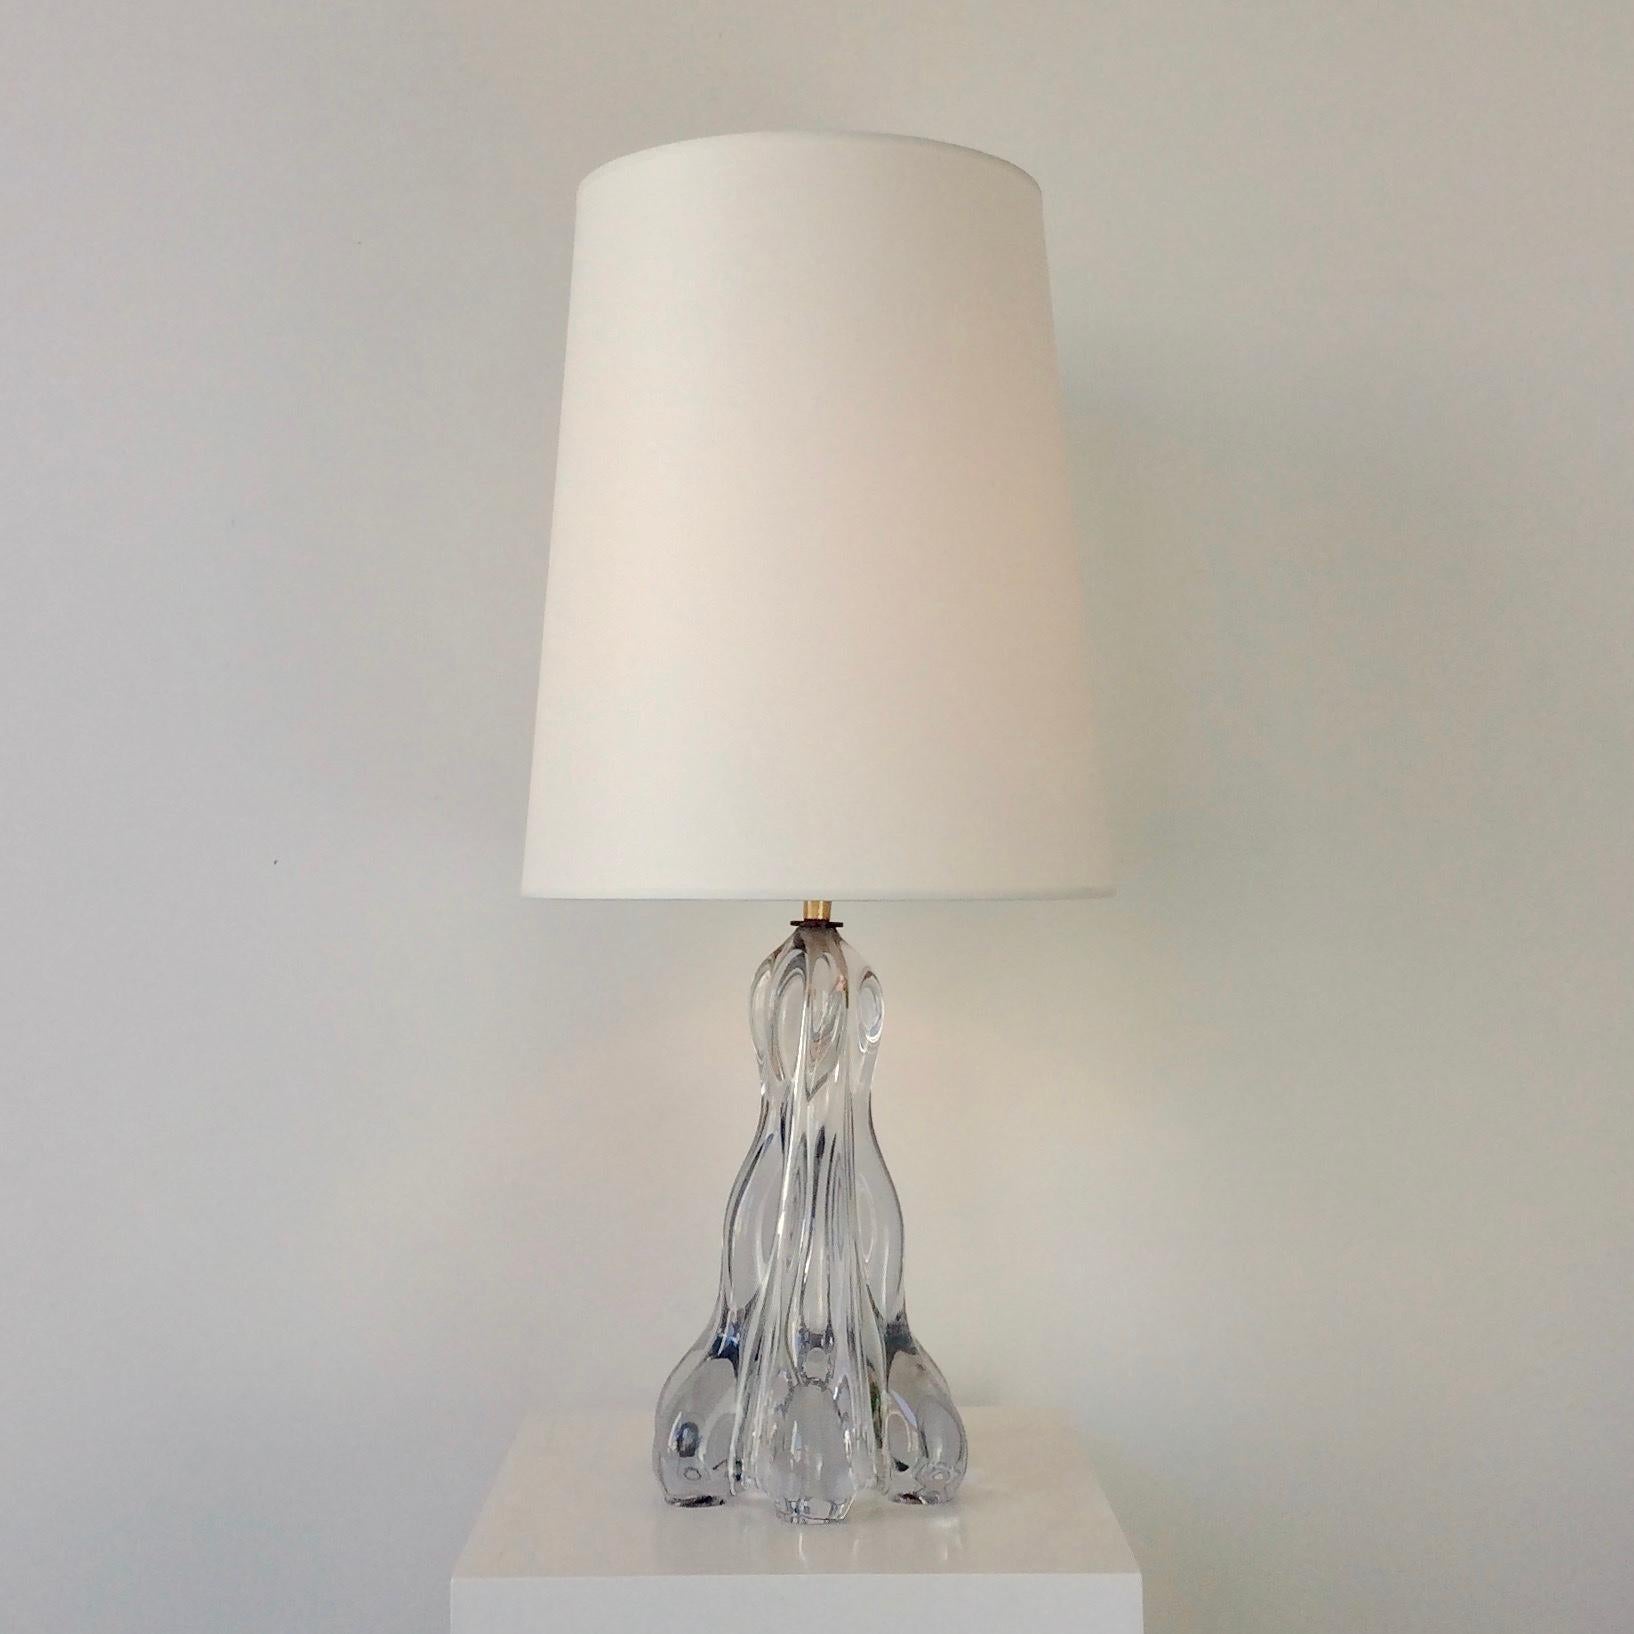 Murano table lamp, circa 1940, Italy.
Clear Murano glass, brass and new white fabric shade.
Rewired, one E27 bulb of 40 W.
Dimensions: total height 64 cm, diameter: 30 cm.
All purchases are covered by our Buyer Protection Guarantee.
This item